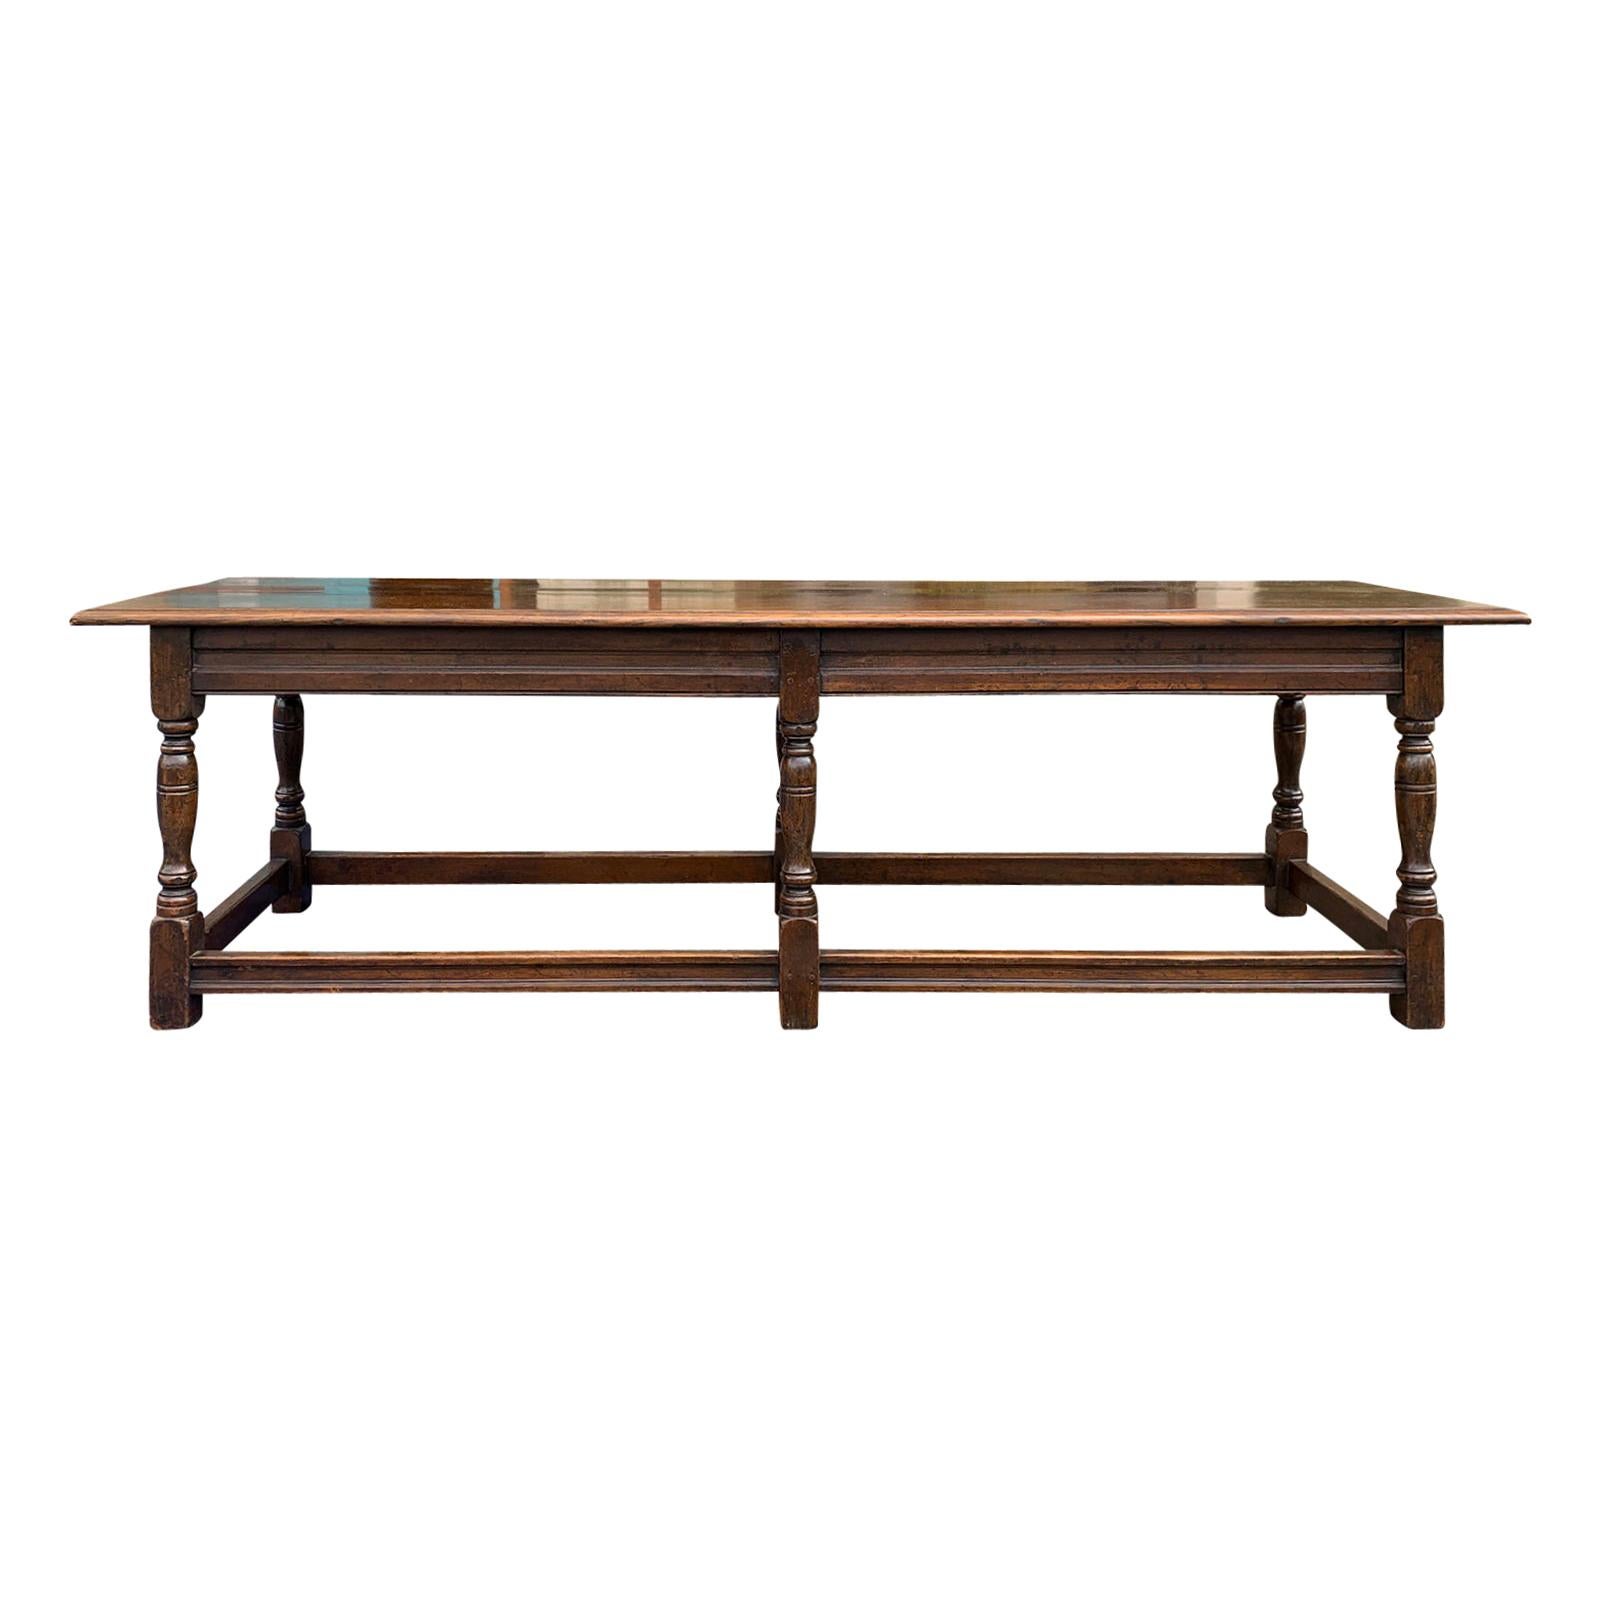 Long English Wood Coffee Table or Joint Stool Bench, circa 1900s-1930s